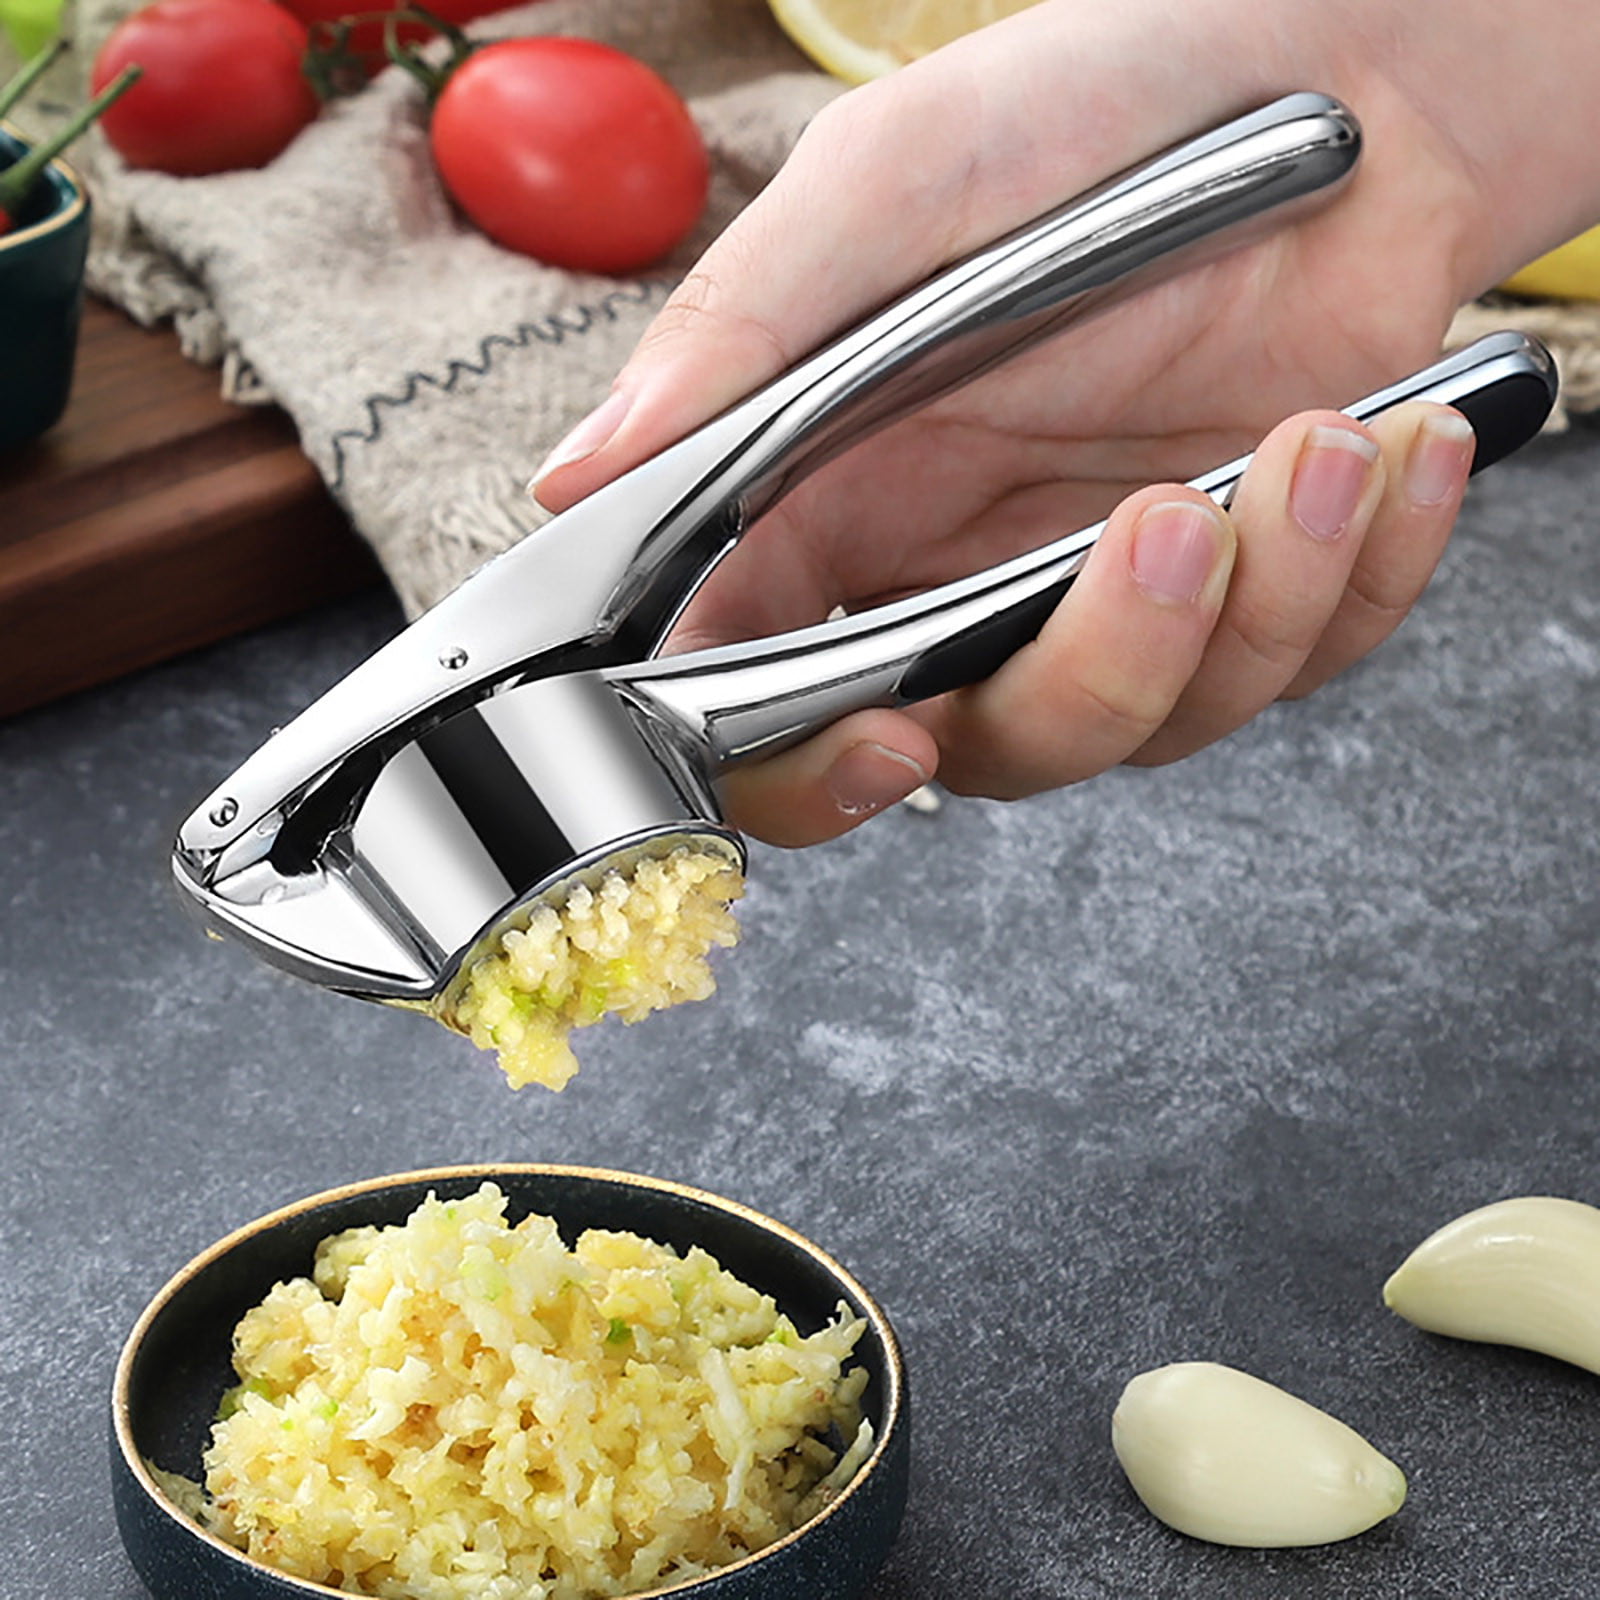 Jiaroswwei Electric Garlic Press Wireless Water-proof Plastic Simple Operation Electric Meat Grinder Kitchen Tools, Size: 250 mL, Gray